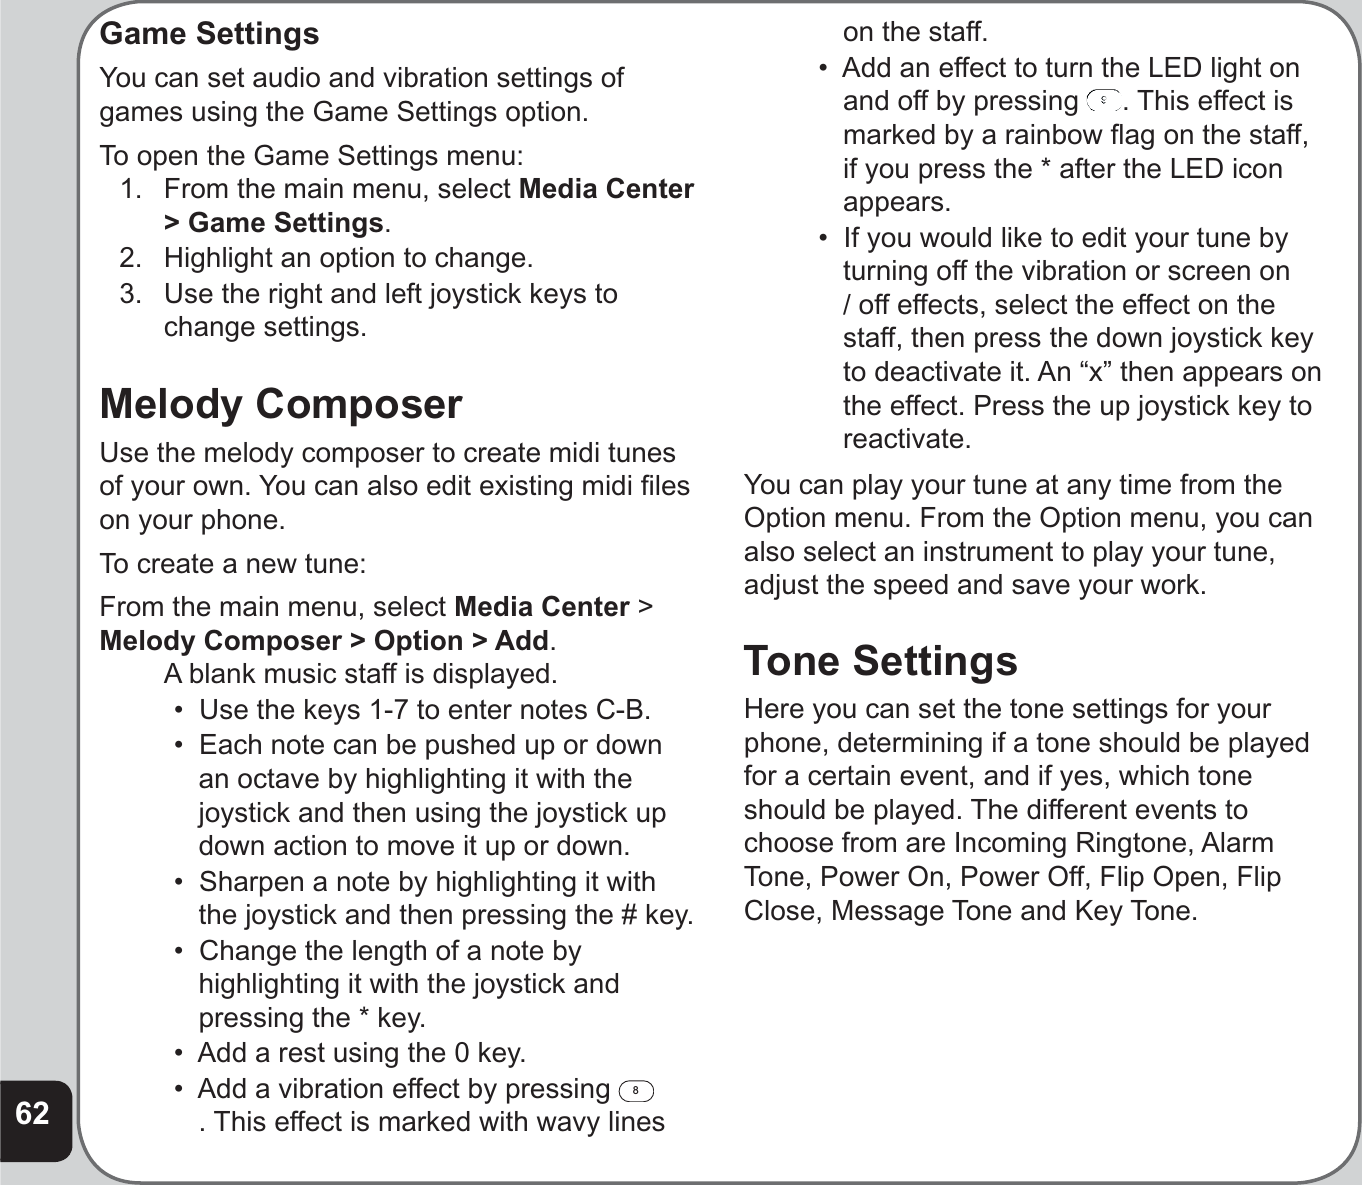 62Game SettingsYou can set audio and vibration settings of games using the Game Settings option.To open the Game Settings menu:1.  From the main menu, select Media Center &gt; Game Settings.2.  Highlight an option to change.3.  Use the right and left joystick keys to change settings.Melody ComposerUse the melody composer to create midi tunes of your own. You can also edit existing midi ﬁ les on your phone.To create a new tune:From the main menu, select Media Center &gt;Melody Composer &gt; Option &gt; Add.  A blank music staff is displayed.•  Use the keys 1-7 to enter notes C-B.•  Each note can be pushed up or down an octave by highlighting it with the joystick and then using the joystick up down action to move it up or down.•  Sharpen a note by highlighting it with the joystick and then pressing the # key.•  Change the length of a note by highlighting it with the joystick and pressing the * key.•  Add a rest using the 0 key.•  Add a vibration effect by pressing 8. This effect is marked with wavy lines on the staff. •  Add an effect to turn the LED light on and off by pressing  . This effect is marked by a rainbow ﬂ ag on the staff, if you press the * after the LED icon appears.•  If you would like to edit your tune by turning off the vibration or screen on / off effects, select the effect on the staff, then press the down joystick key to deactivate it. An “x” then appears on the effect. Press the up joystick key to reactivate.You can play your tune at any time from the Option menu. From the Option menu, you can also select an instrument to play your tune, adjust the speed and save your work. Tone SettingsHere you can set the tone settings for your phone, determining if a tone should be played for a certain event, and if yes, which tone should be played. The different events to choose from are Incoming Ringtone, Alarm Tone, Power On, Power Off, Flip Open, Flip Close, Message Tone and Key Tone.